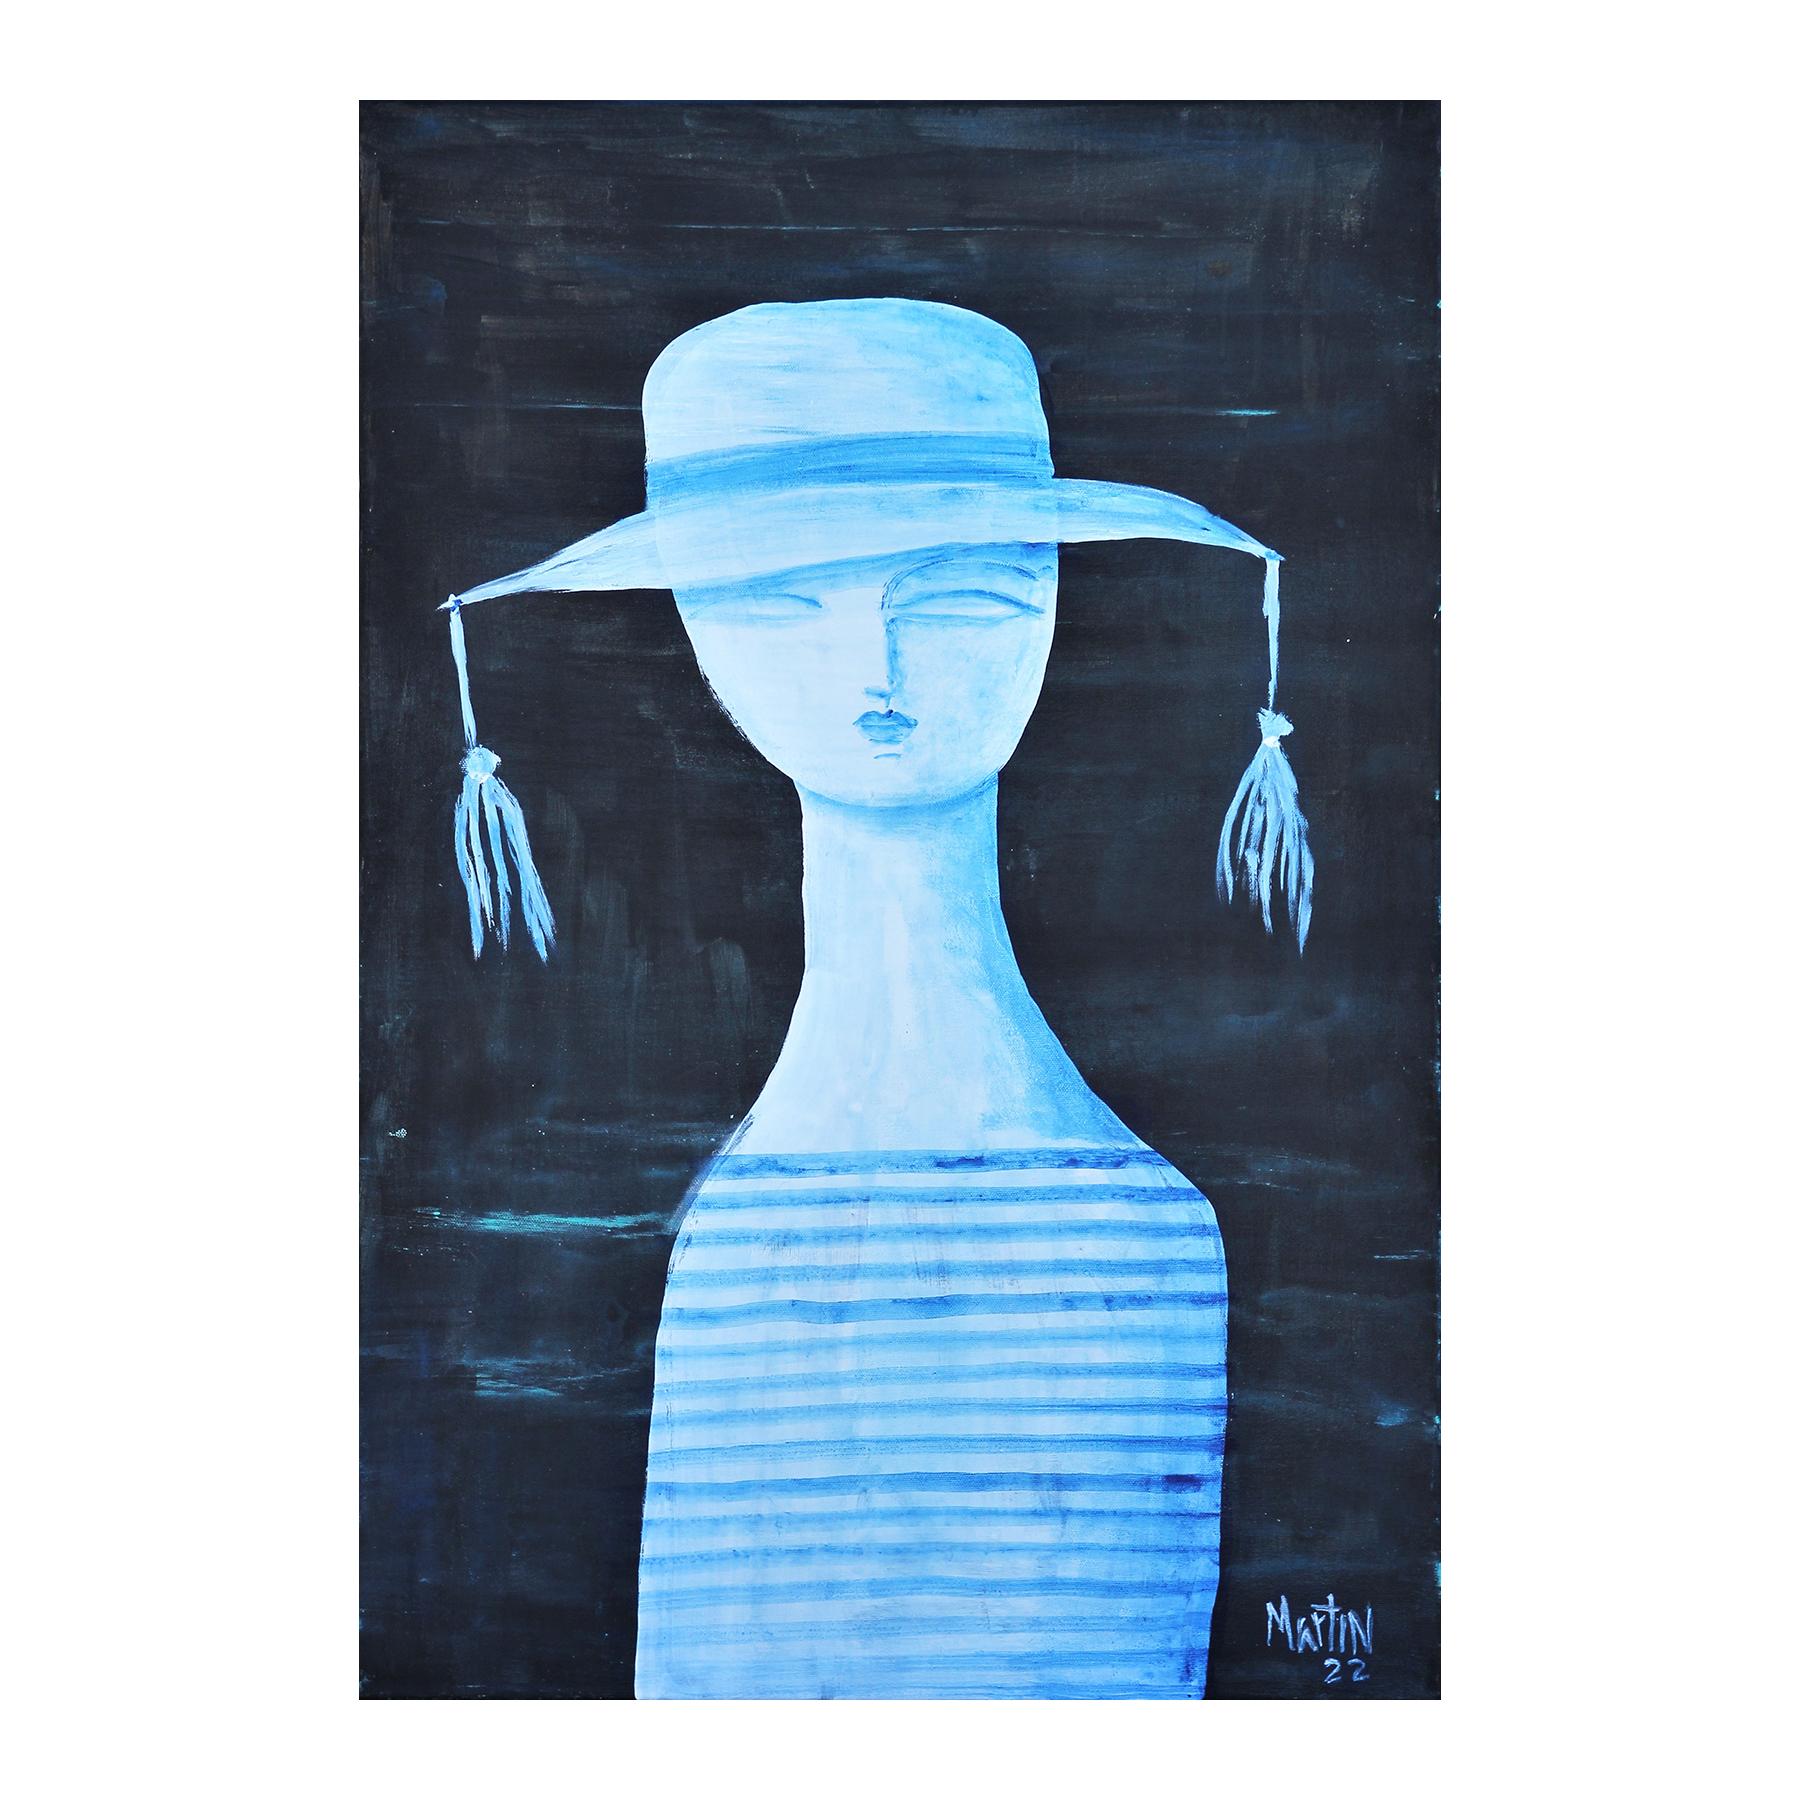 Blue toned abstract figurative painting by Houston, TX artist, Larry Martin. The painting depicts a blue female figure wearing a tasseled hat against a dark blue background. Signed and dated by the artist at the bottom right. Unframed but framing